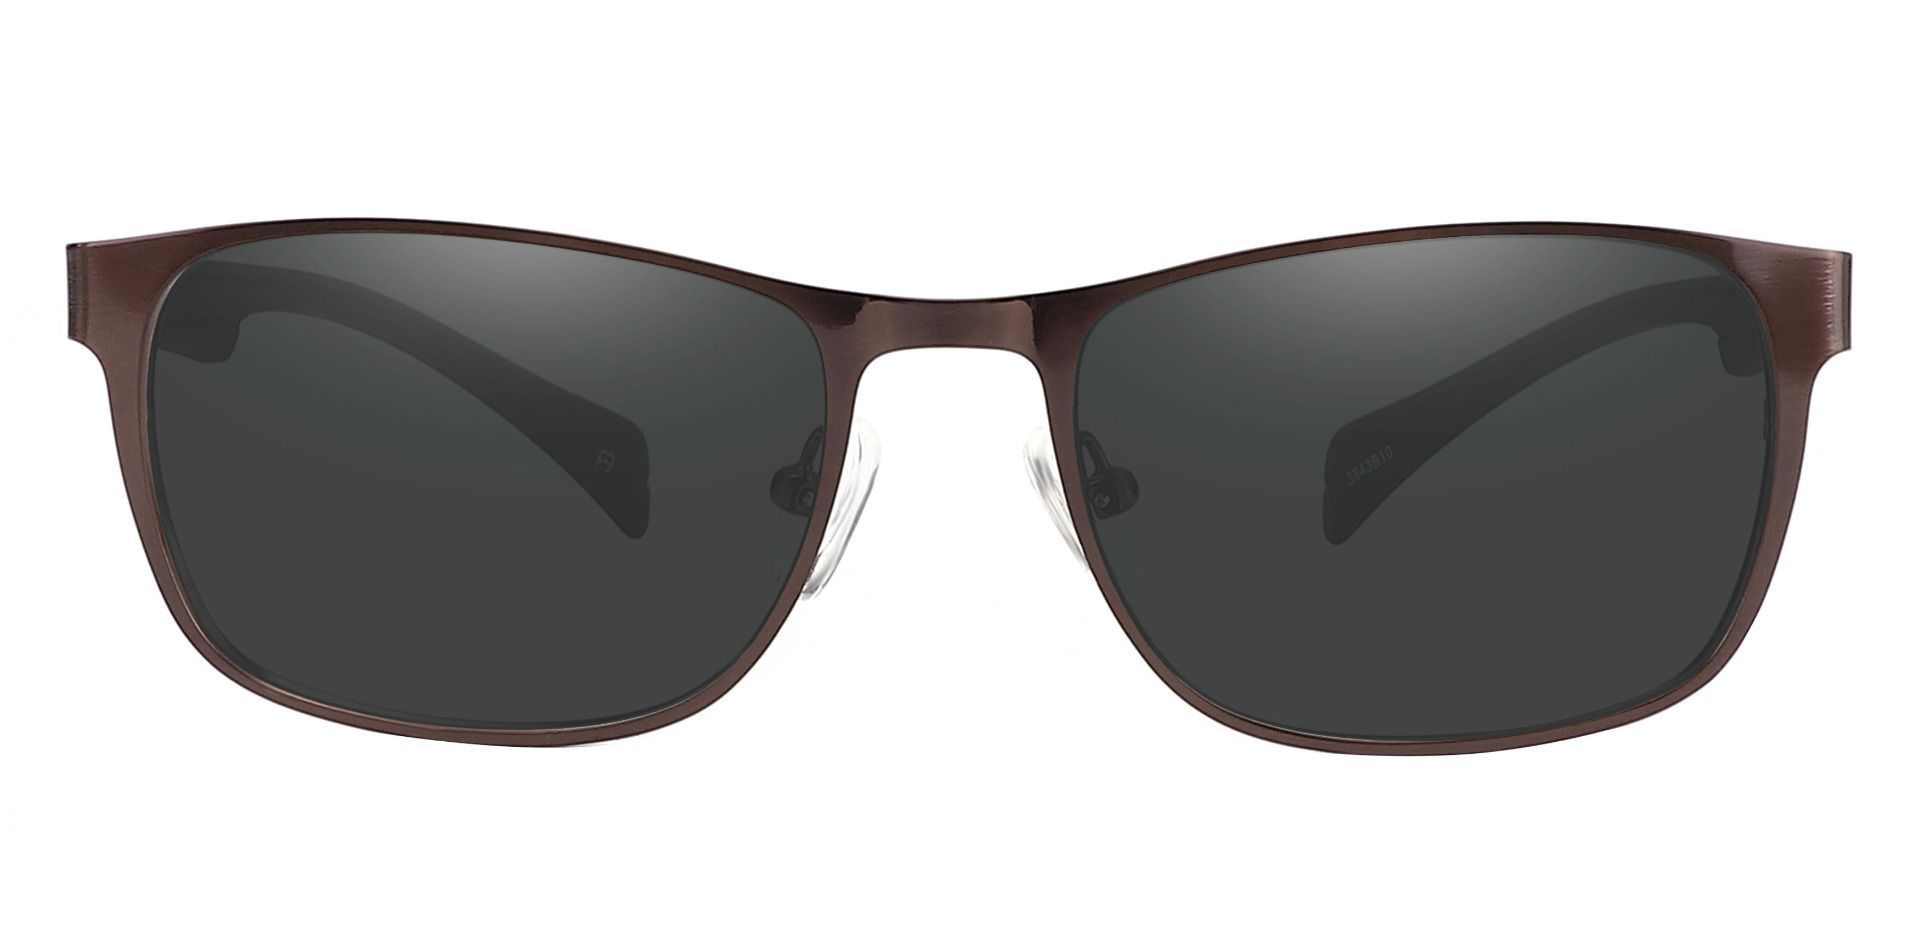 Duncan Rectangle Non-Rx Sunglasses - Brown Frame With Gray Lenses